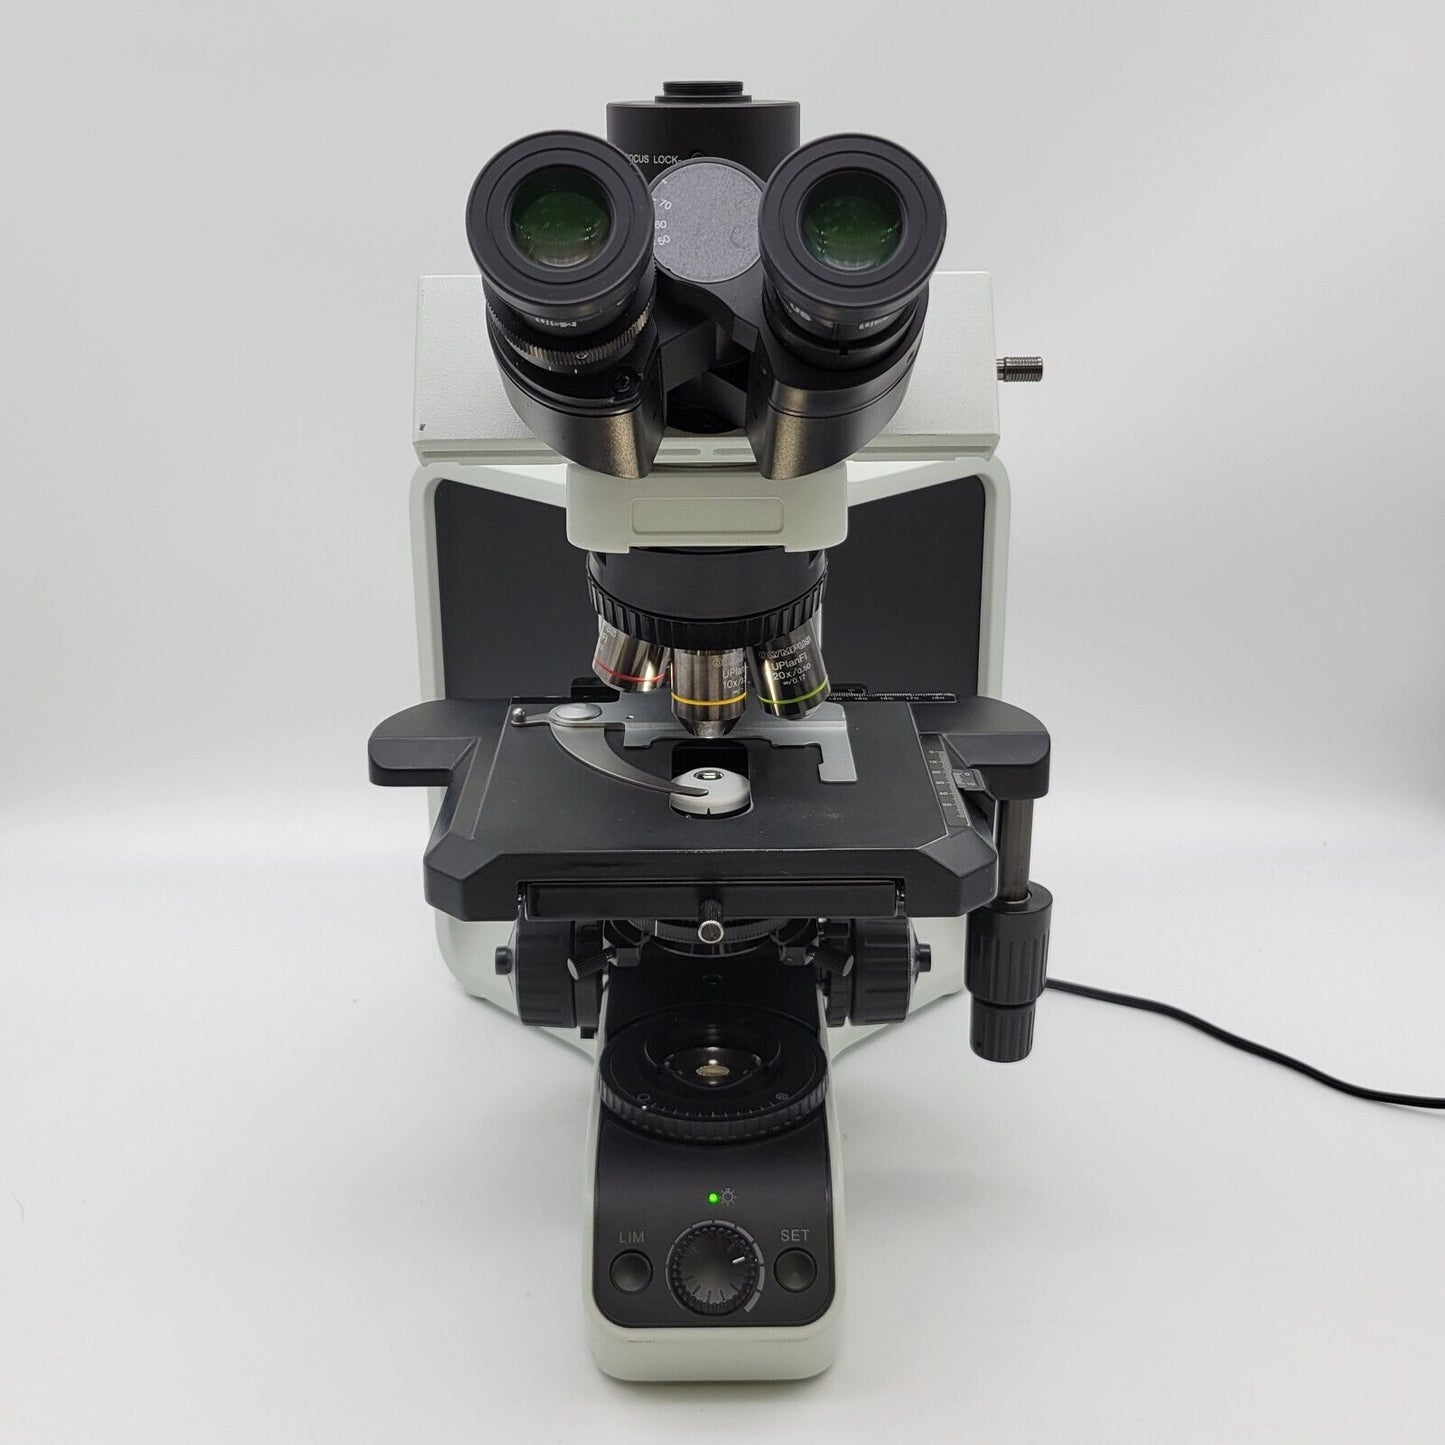 Olympus Microscope BX43 with Fluorites and Trinocular Head for Pathology - microscopemarketplace